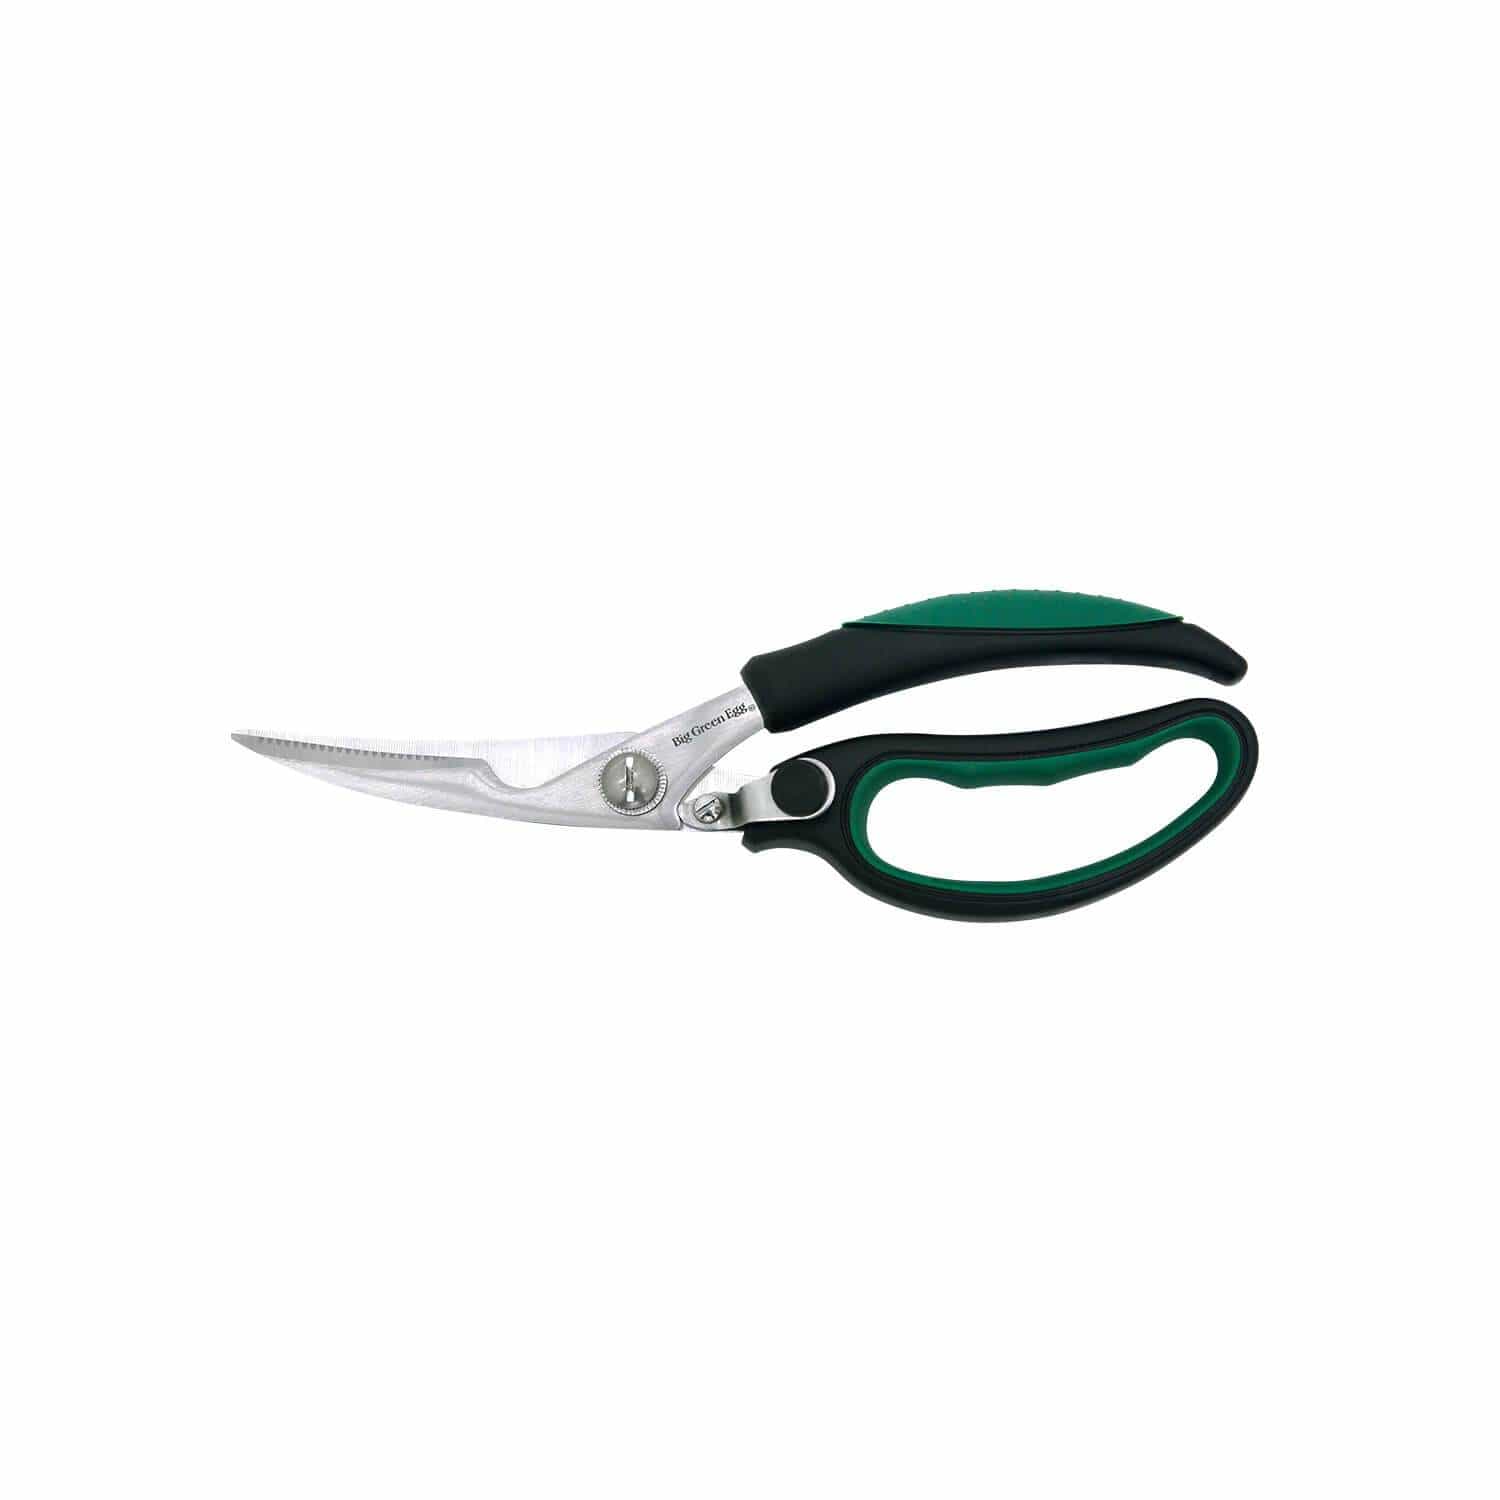 Big Green Egg Barbeque Heavy Duty Stainless Steel Kitchen Shears